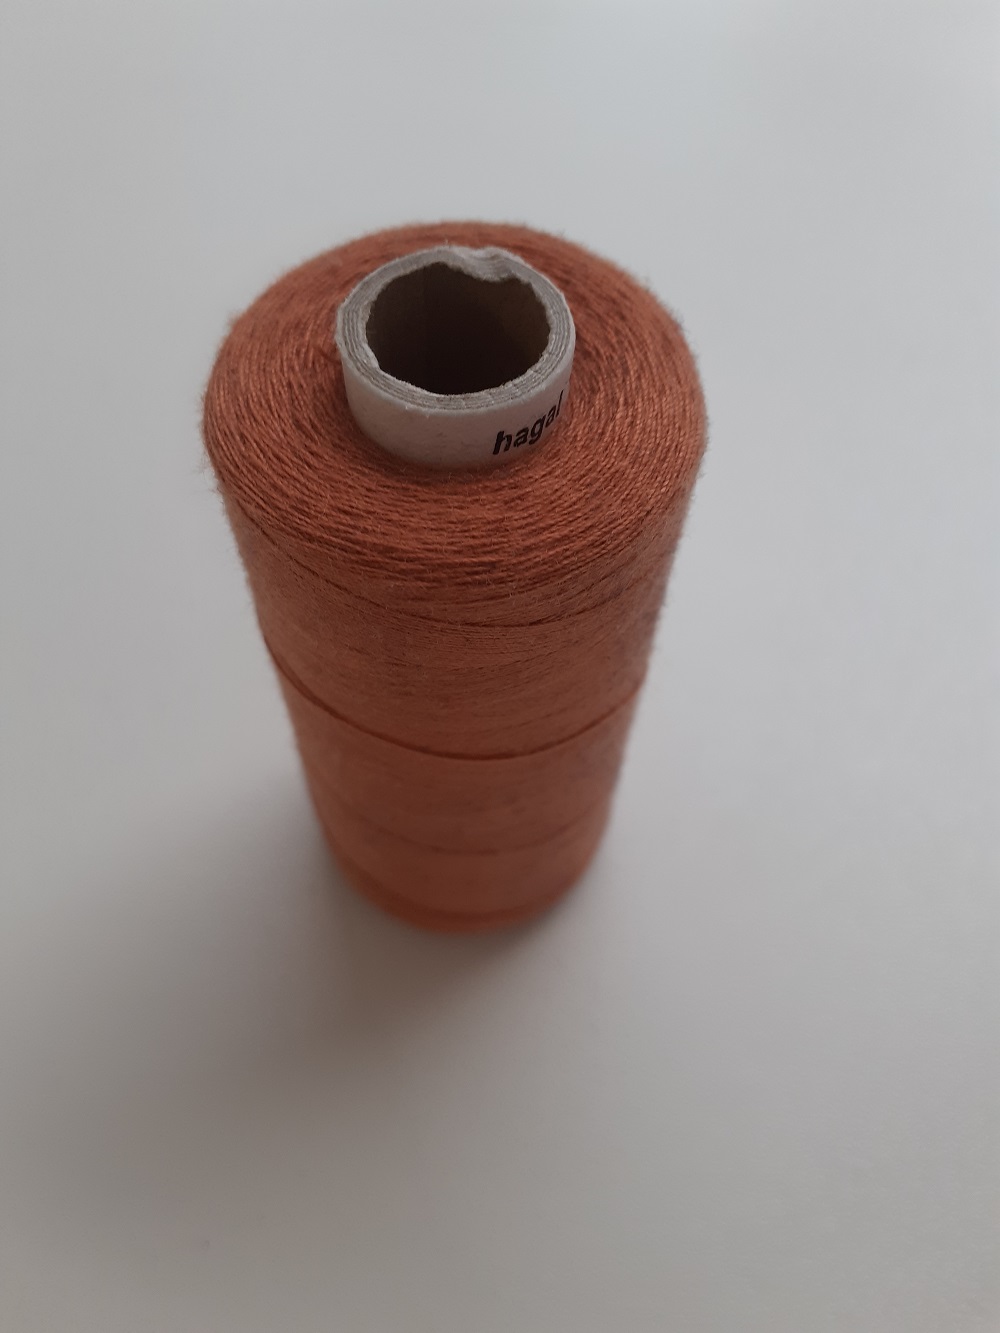 Universal sewing thread, brown, 1000m, loaded